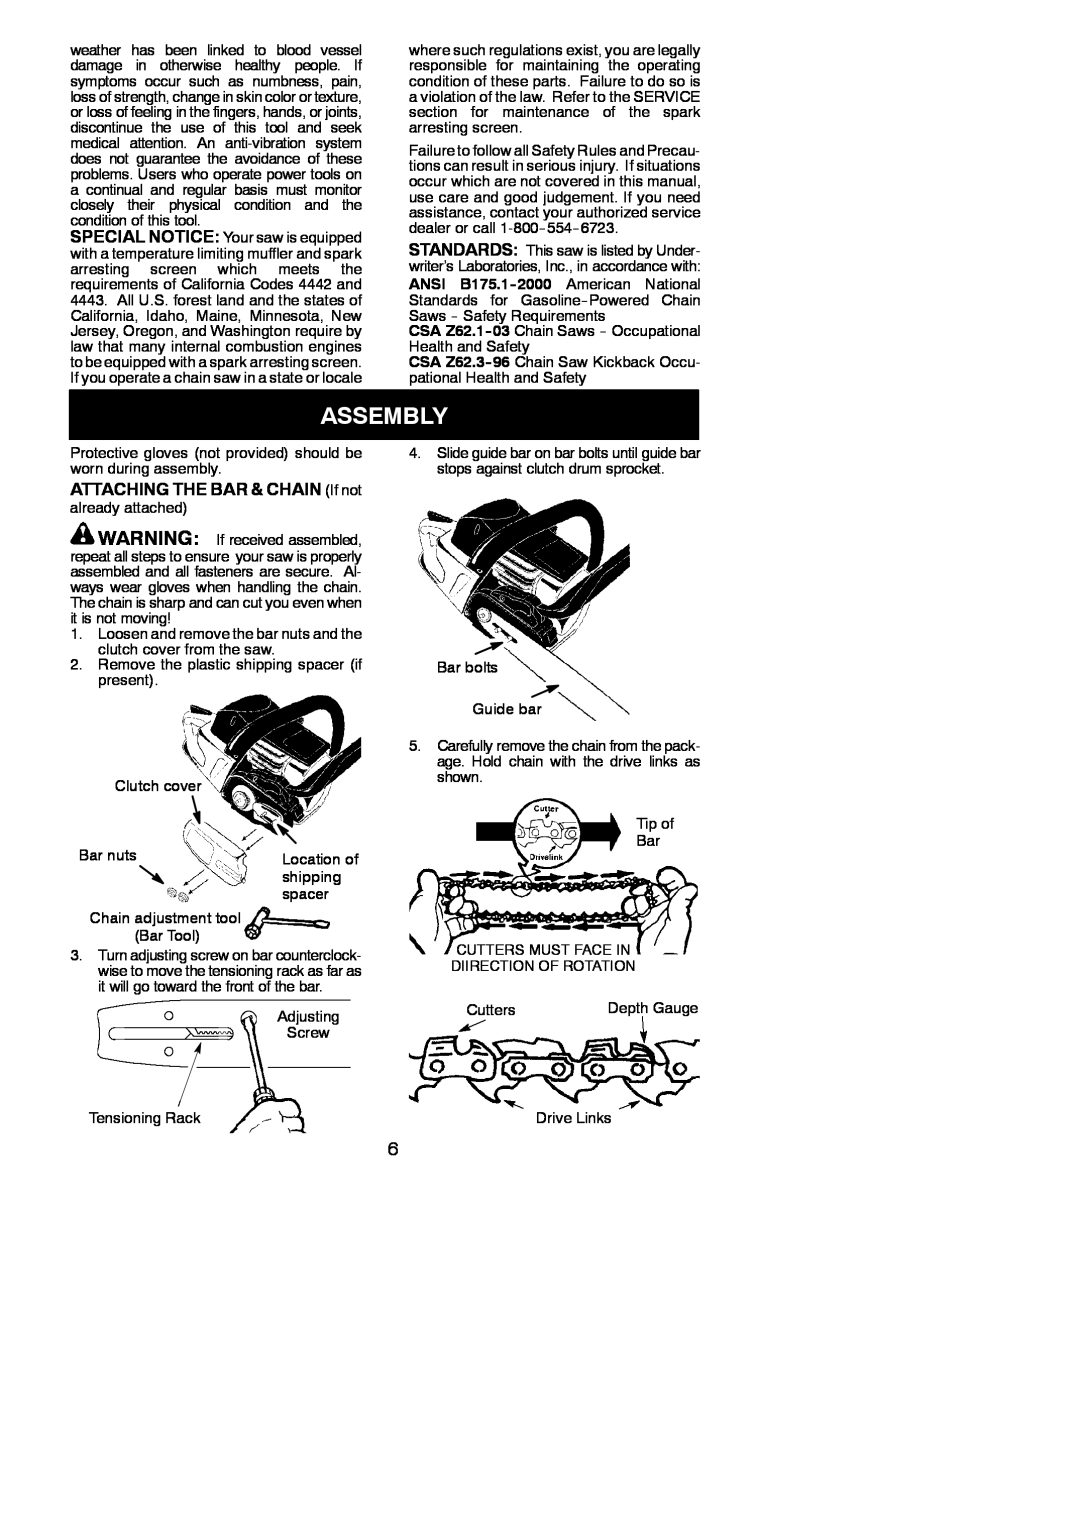 Poulan 530165555 instruction manual Assembly, ATTACHING THE BAR & CHAIN If not 